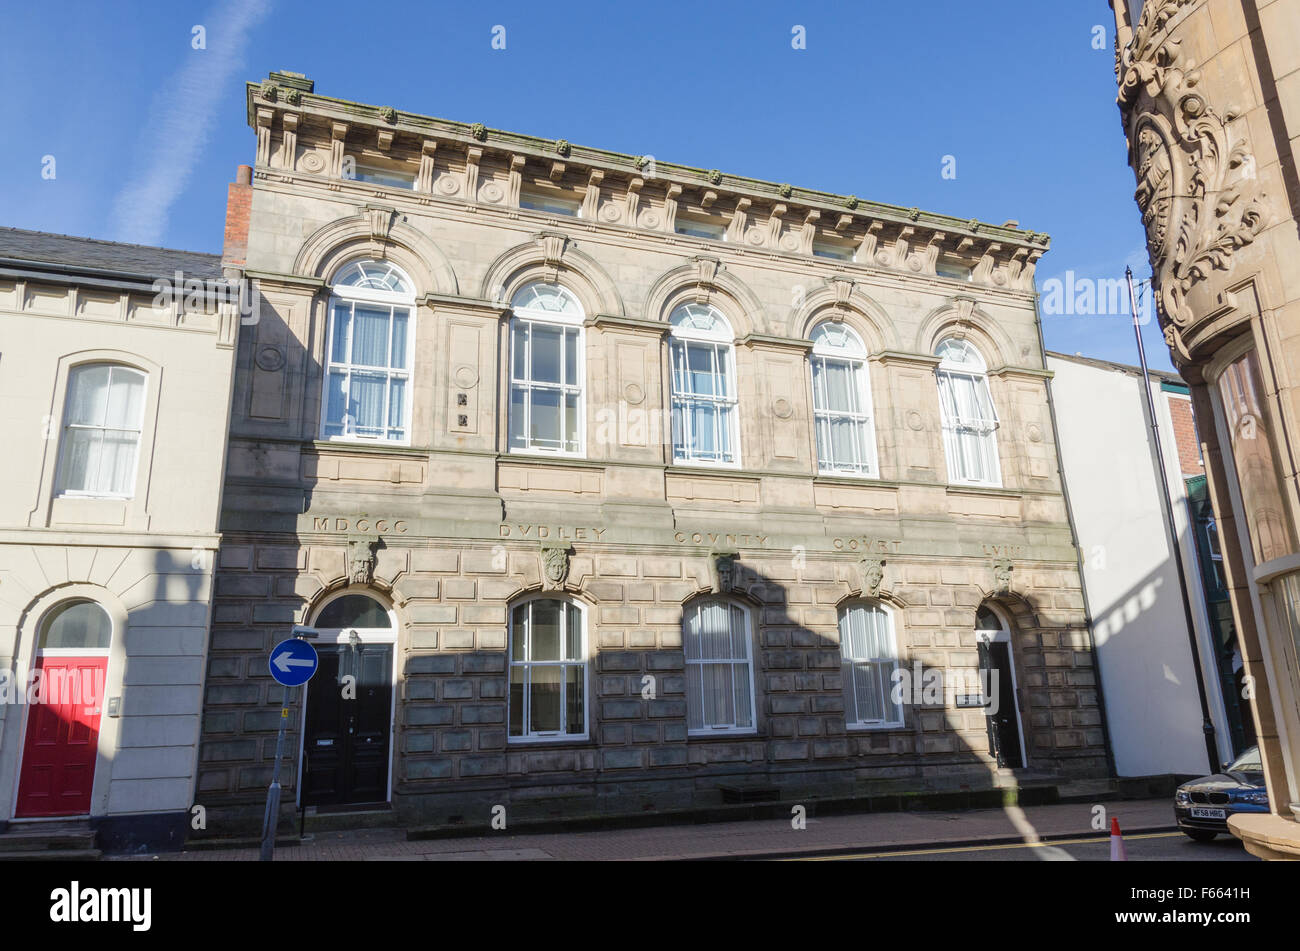 Georgian stone building in Priory Street, Dudley Stock Photo